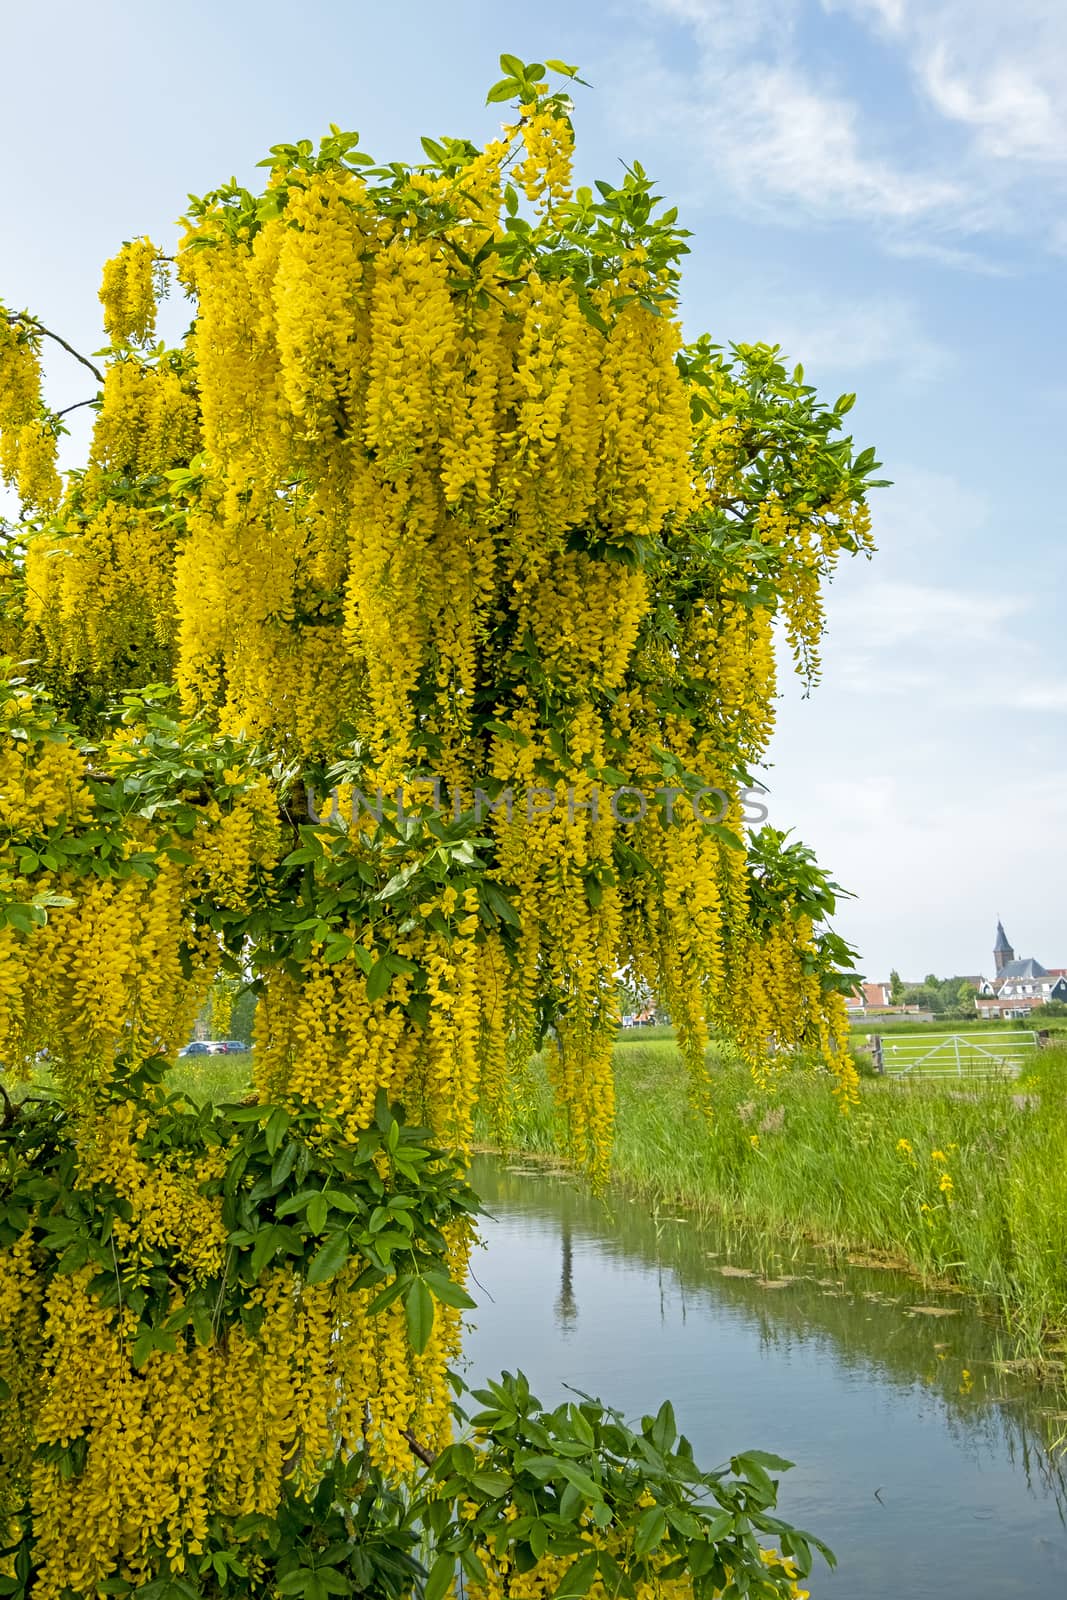 Blossoming golden rain in the countryside from the Netherlands i by devy